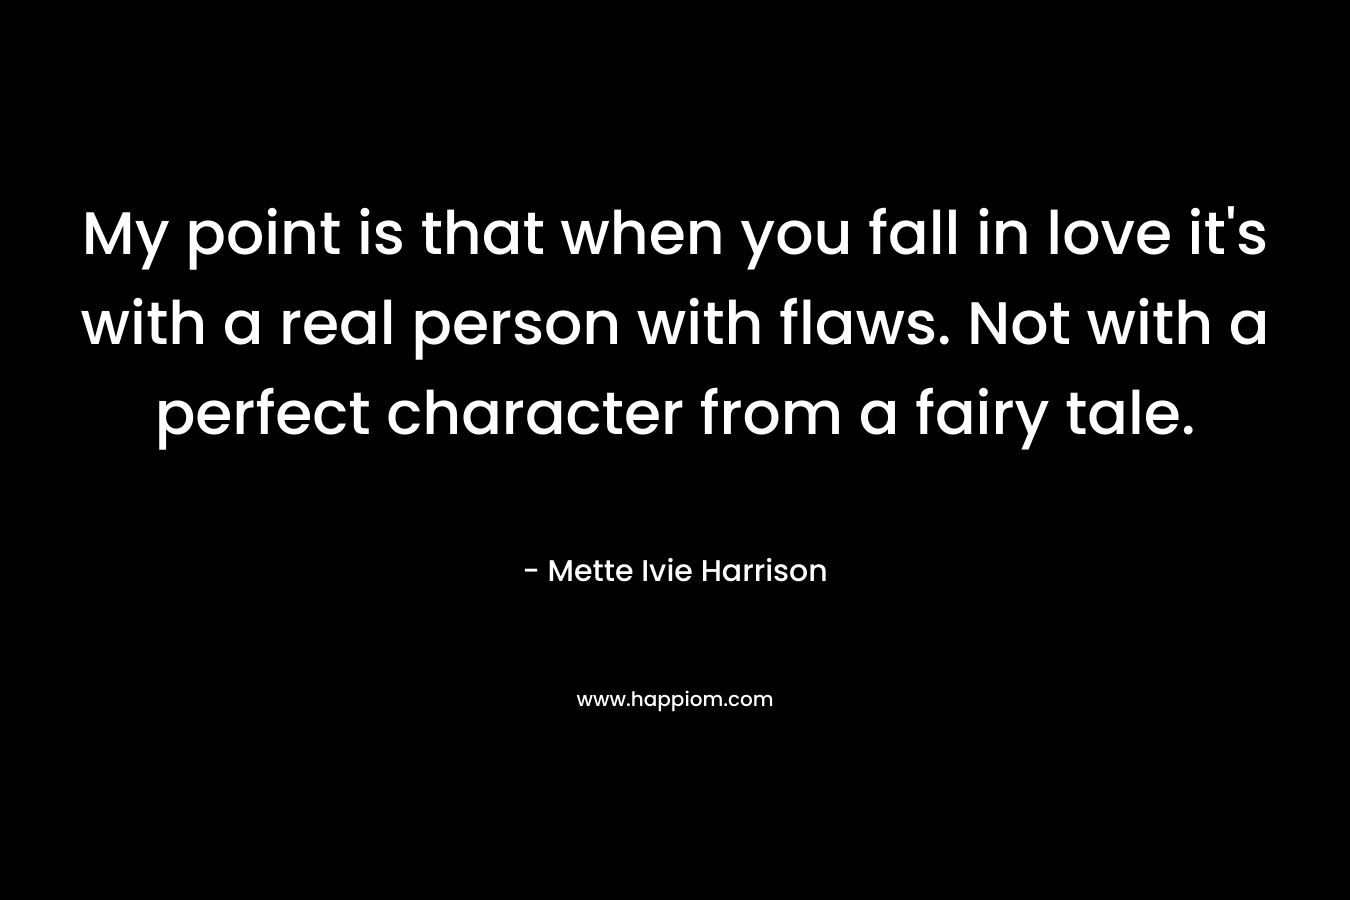 My point is that when you fall in love it's with a real person with flaws. Not with a perfect character from a fairy tale.